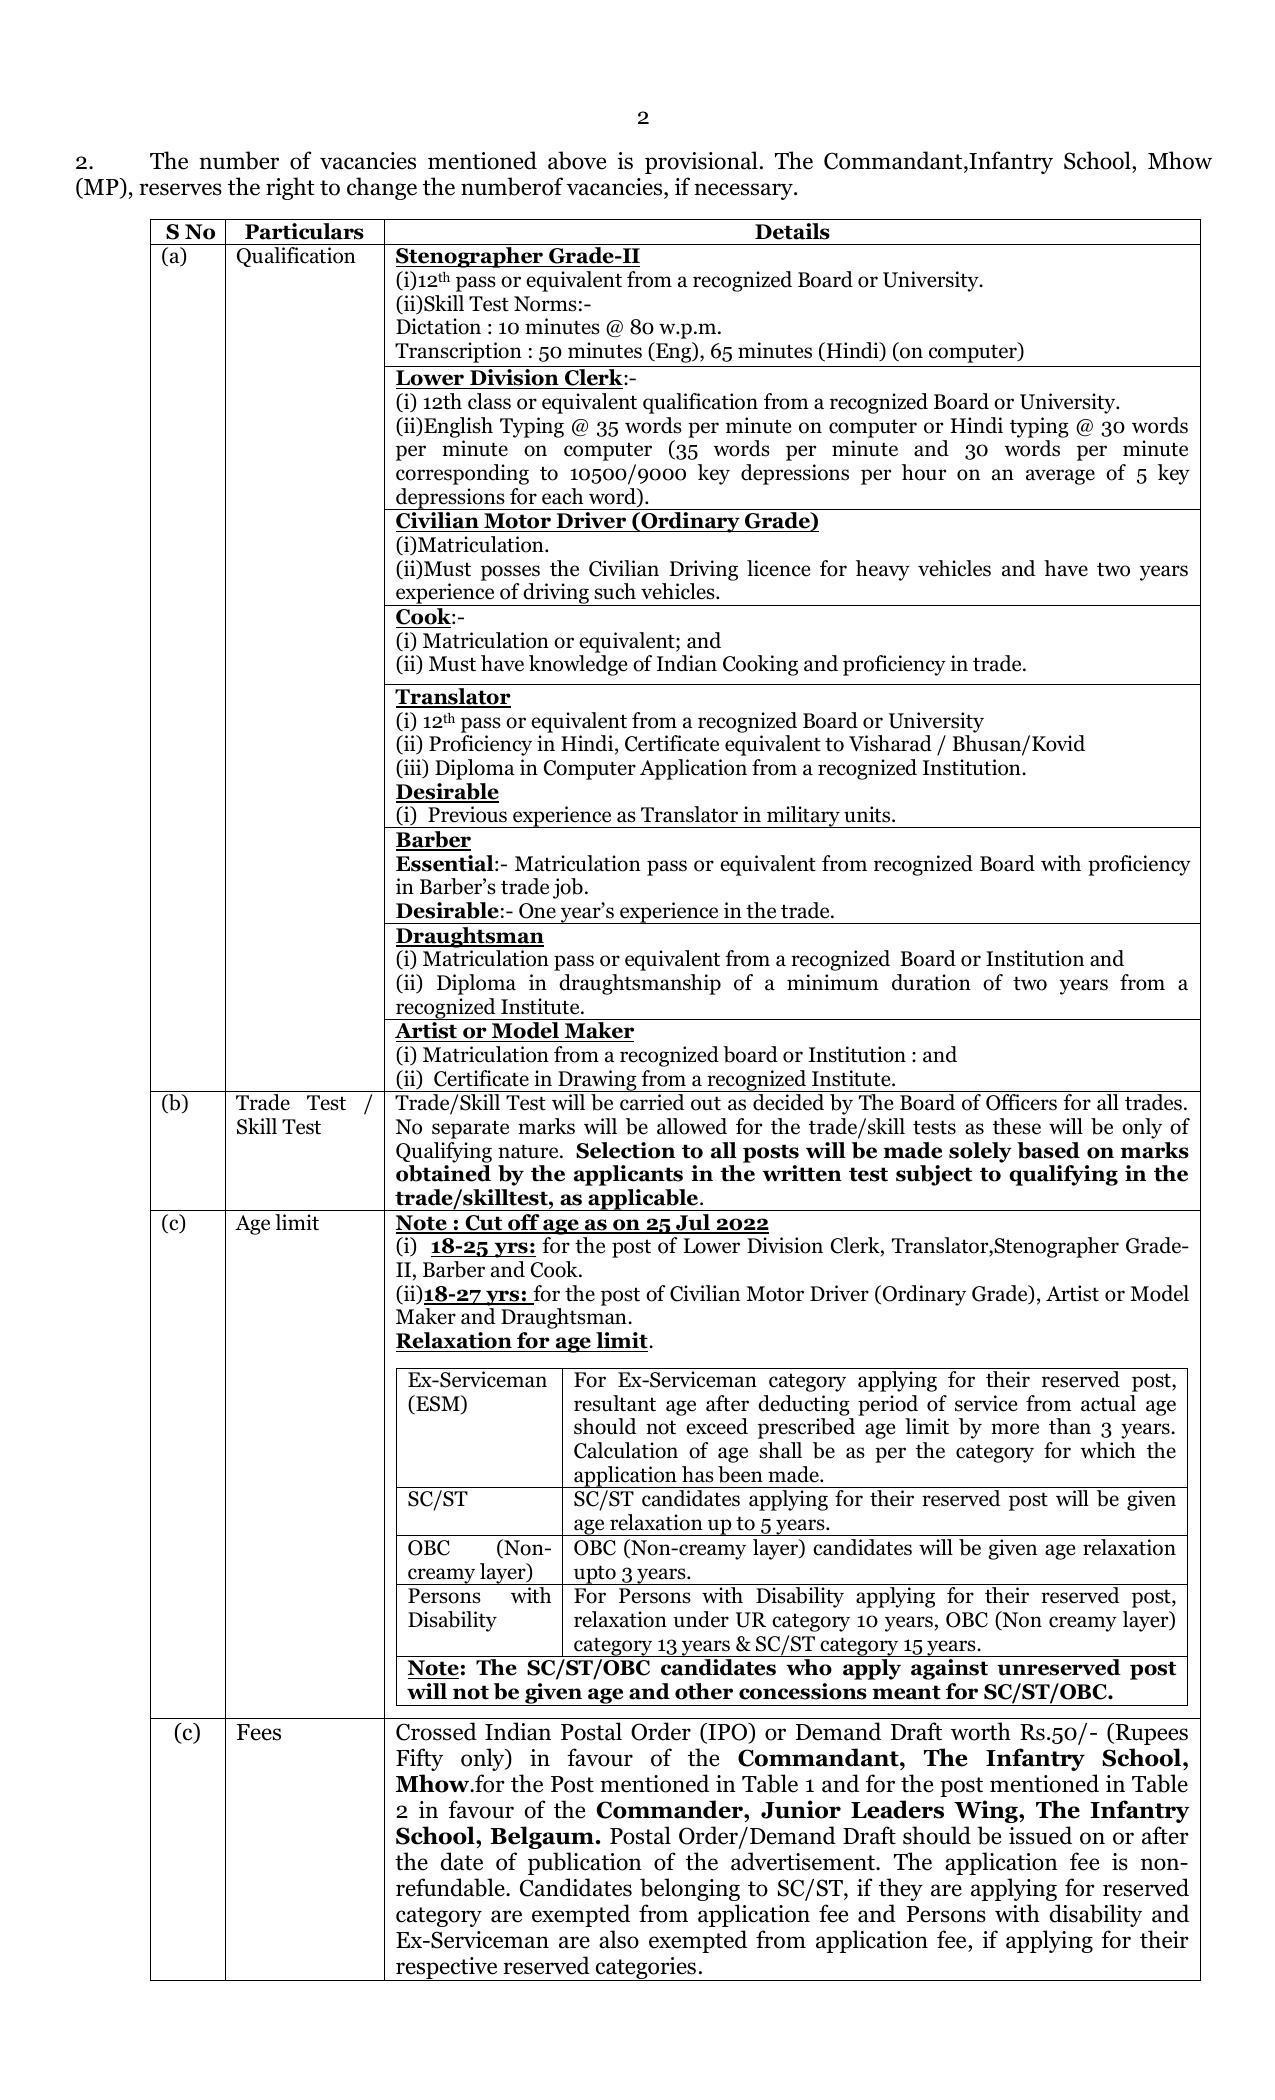 HQ Infantry School MHOW Invites Application for 101 Lower Division Clerk, Stenographer and Various POsts - Page 2